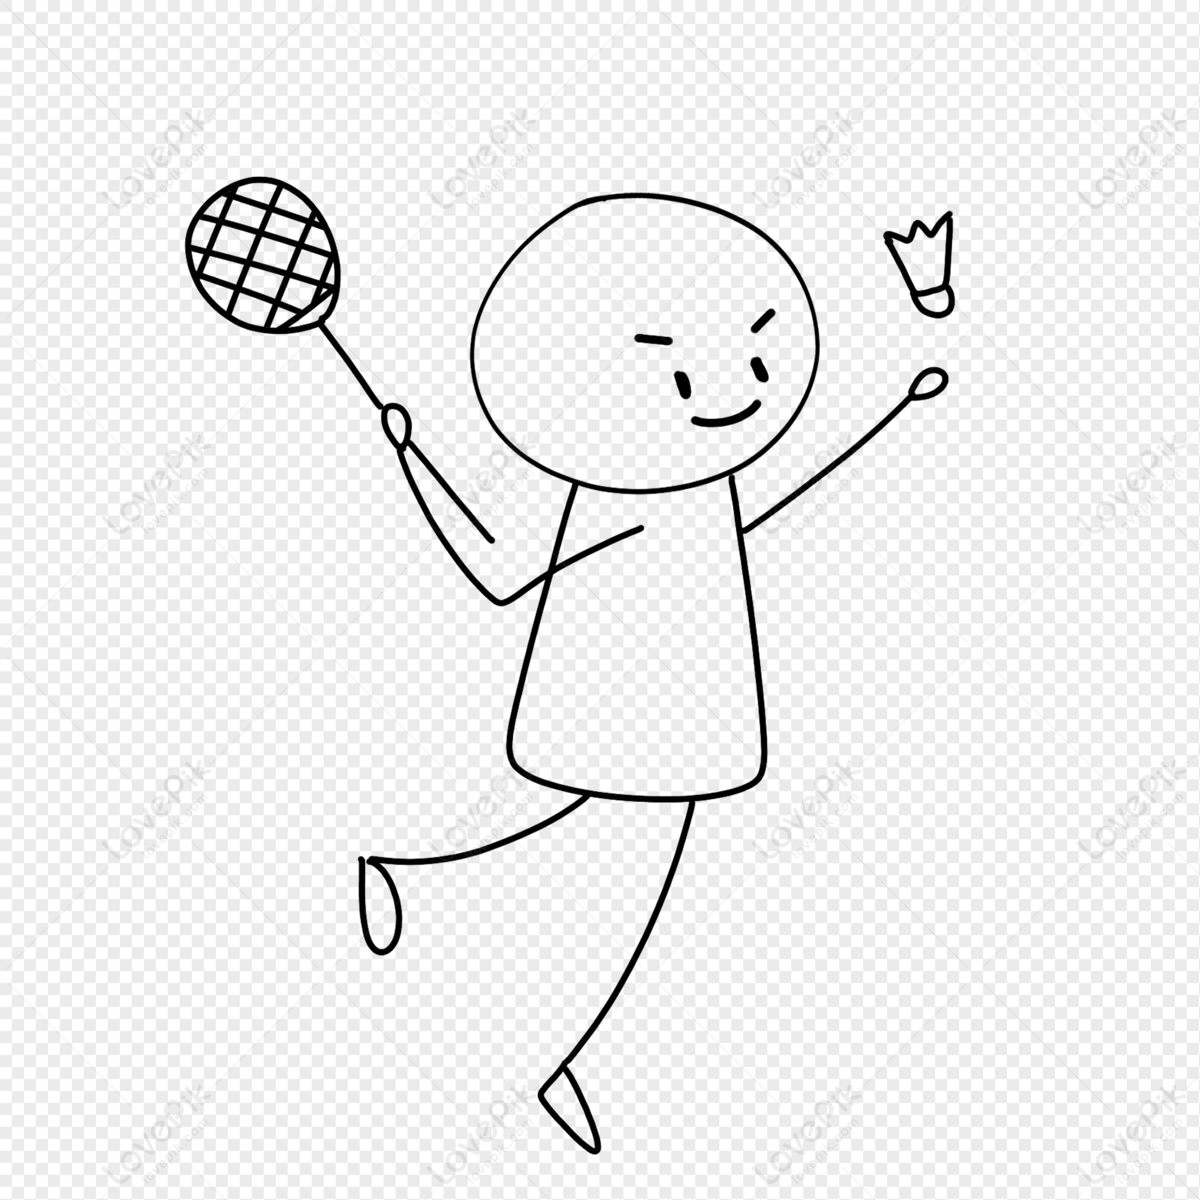 flow regional Dangle Stick Figure Playing Badminton PNG Picture And Clipart Image For Free  Download - Lovepik | 401698755